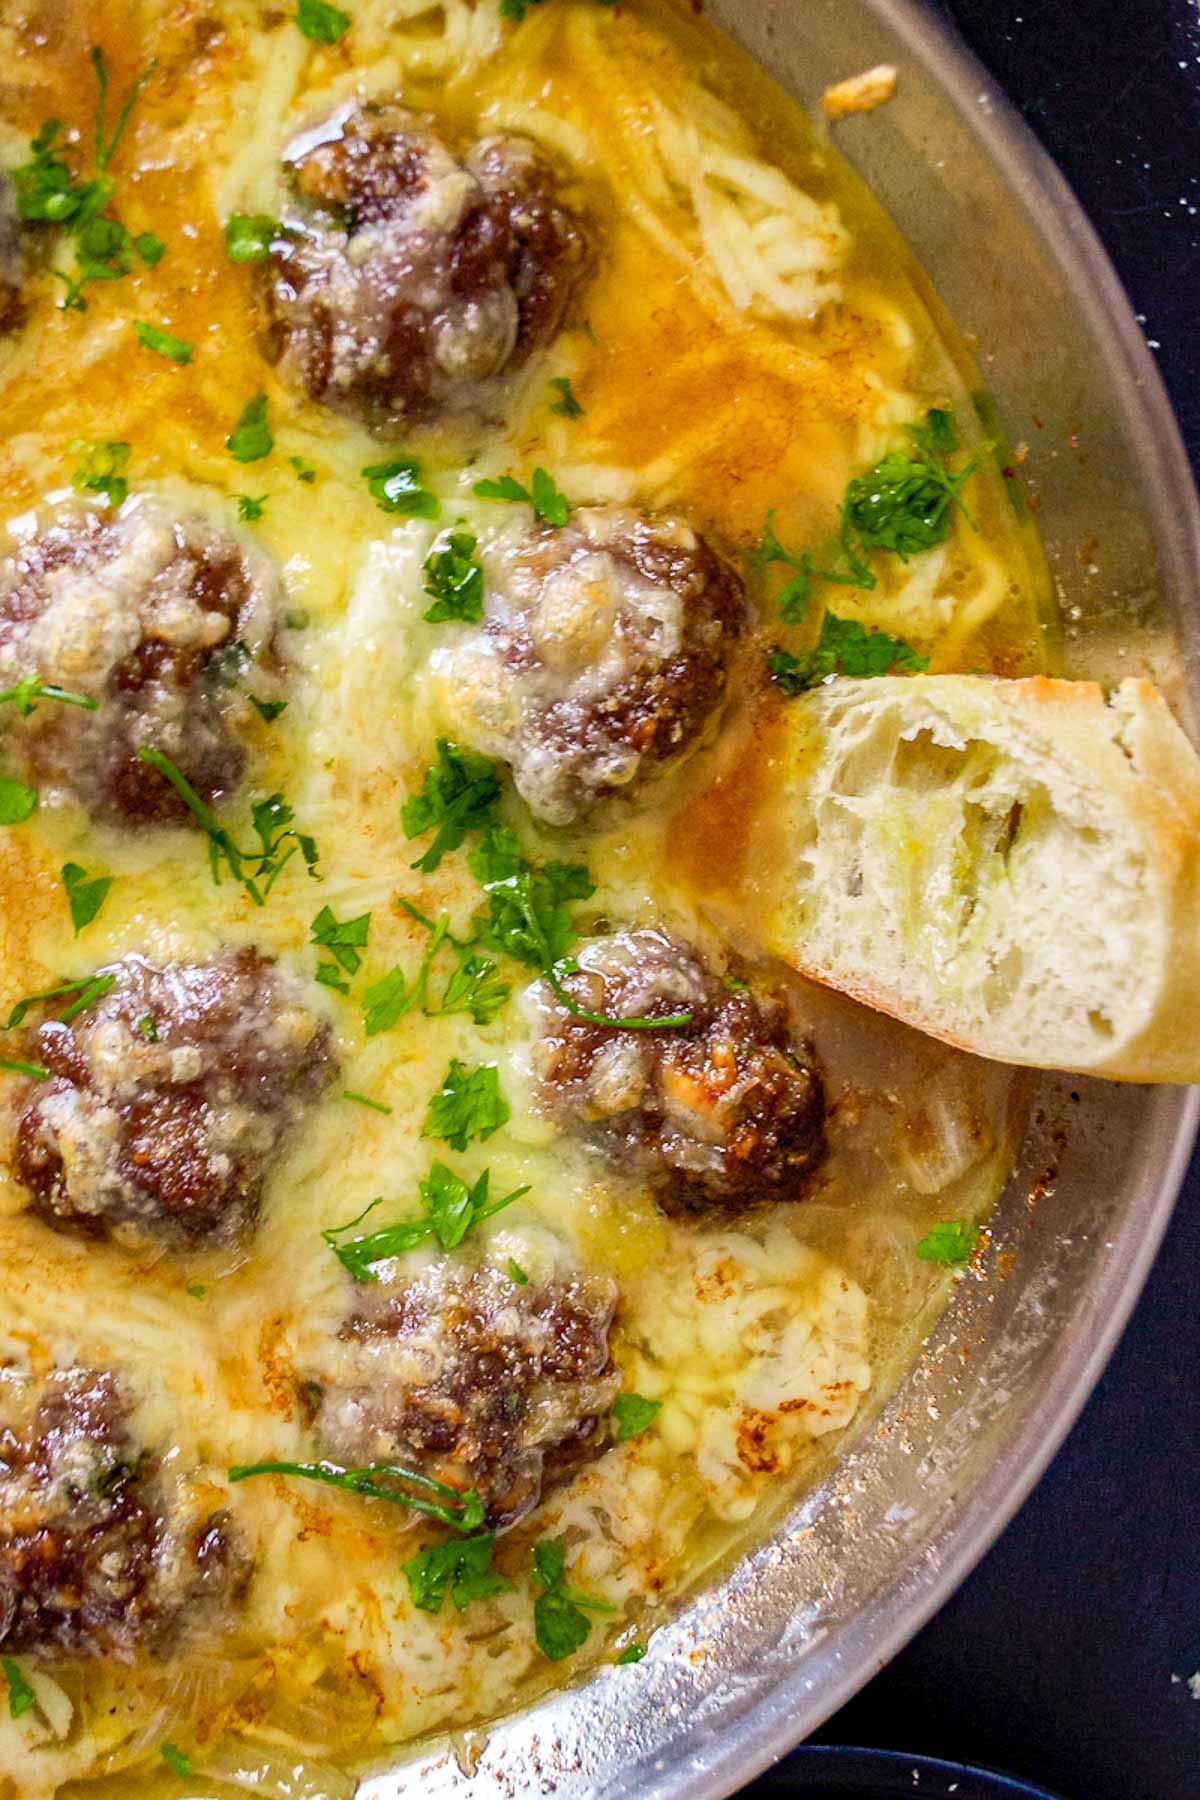 A slice of bread in a pan of french onion soup with meatballs.